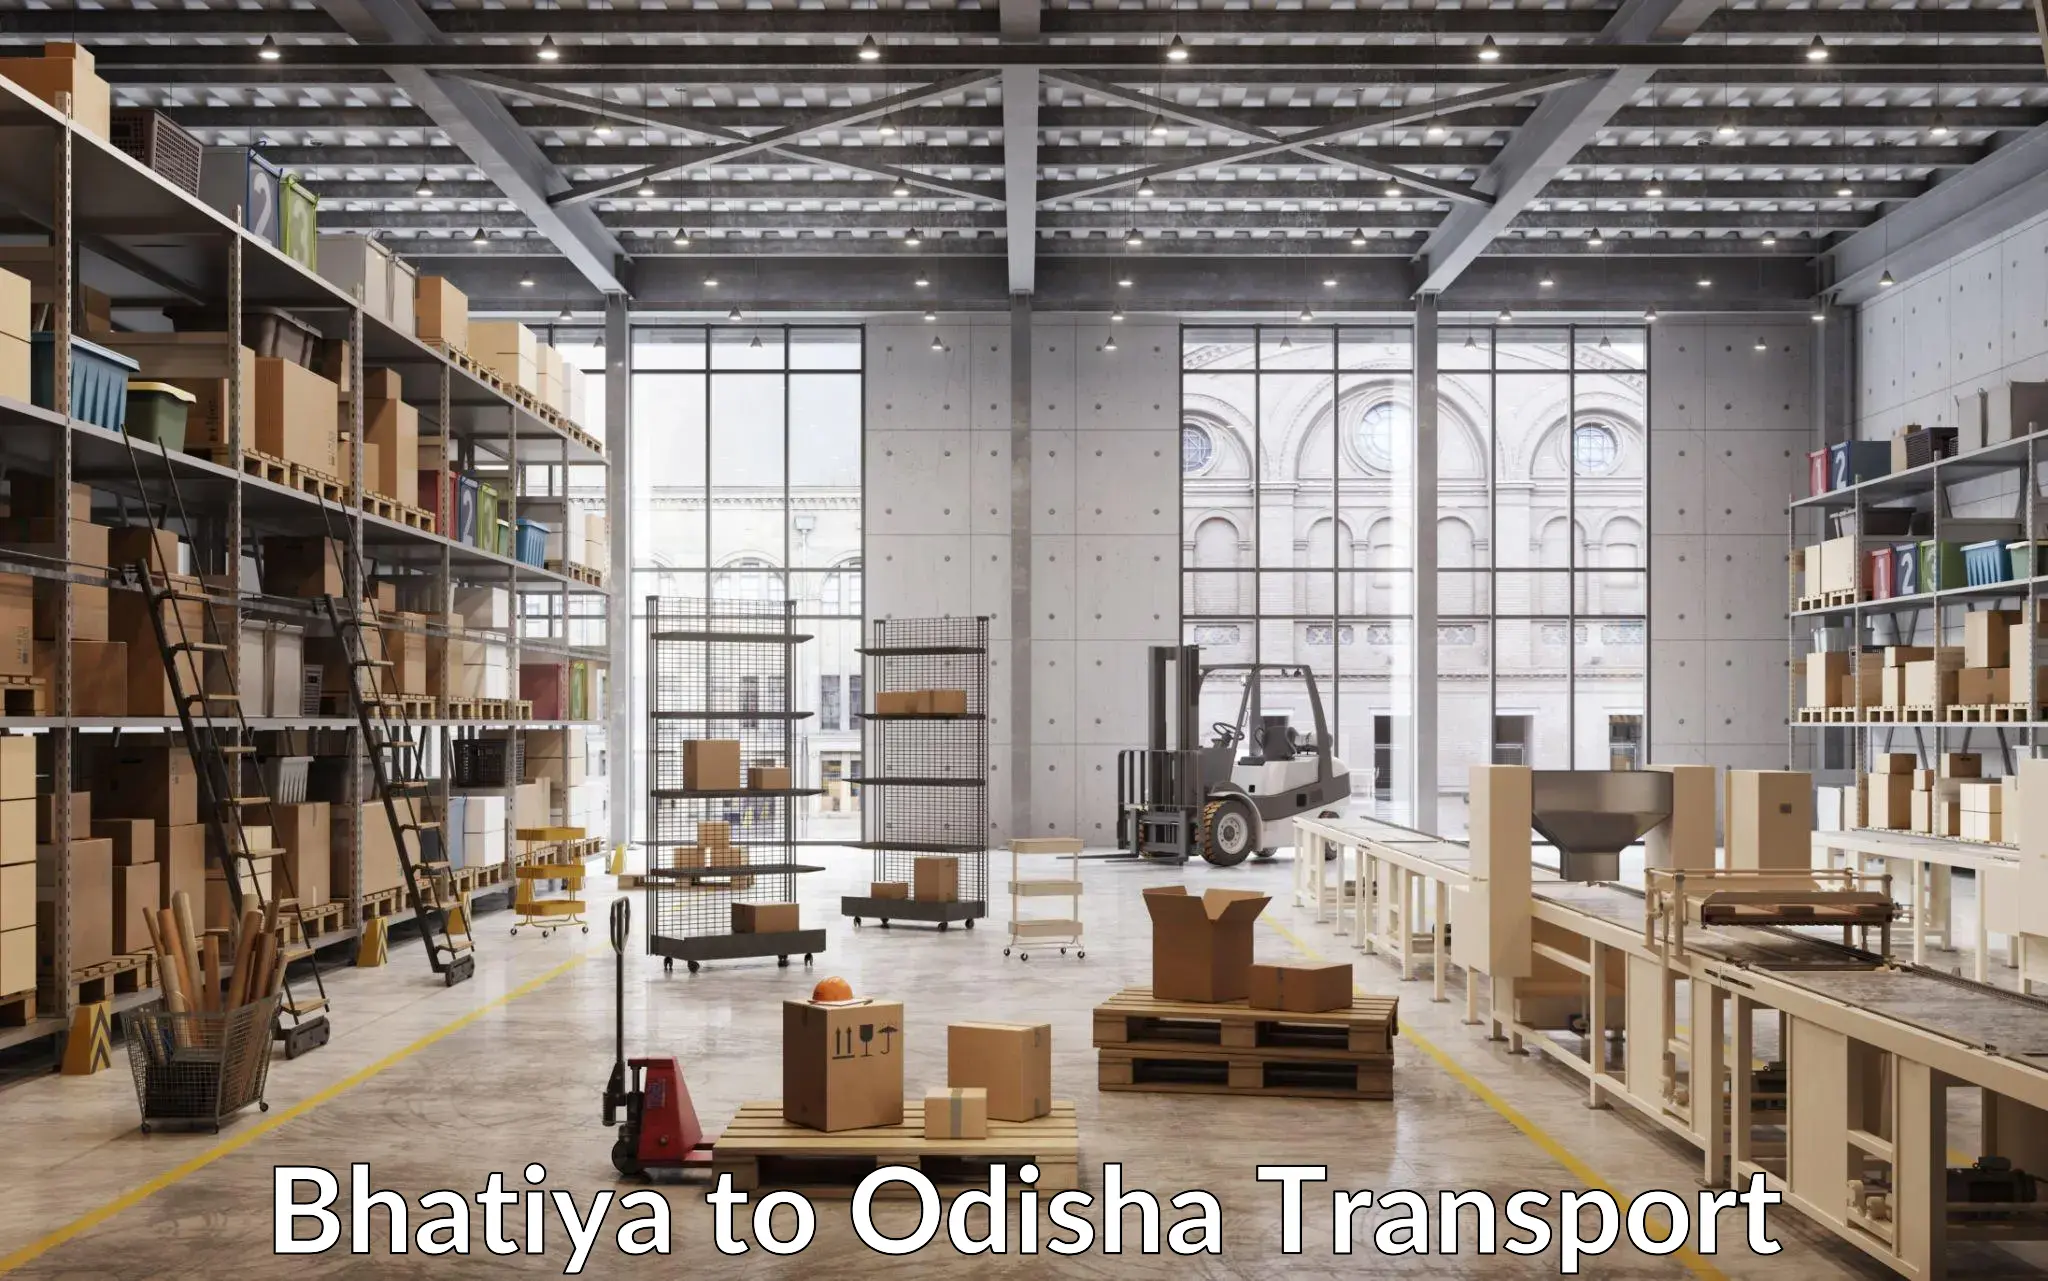 Domestic goods transportation services in Bhatiya to Dhamanagar